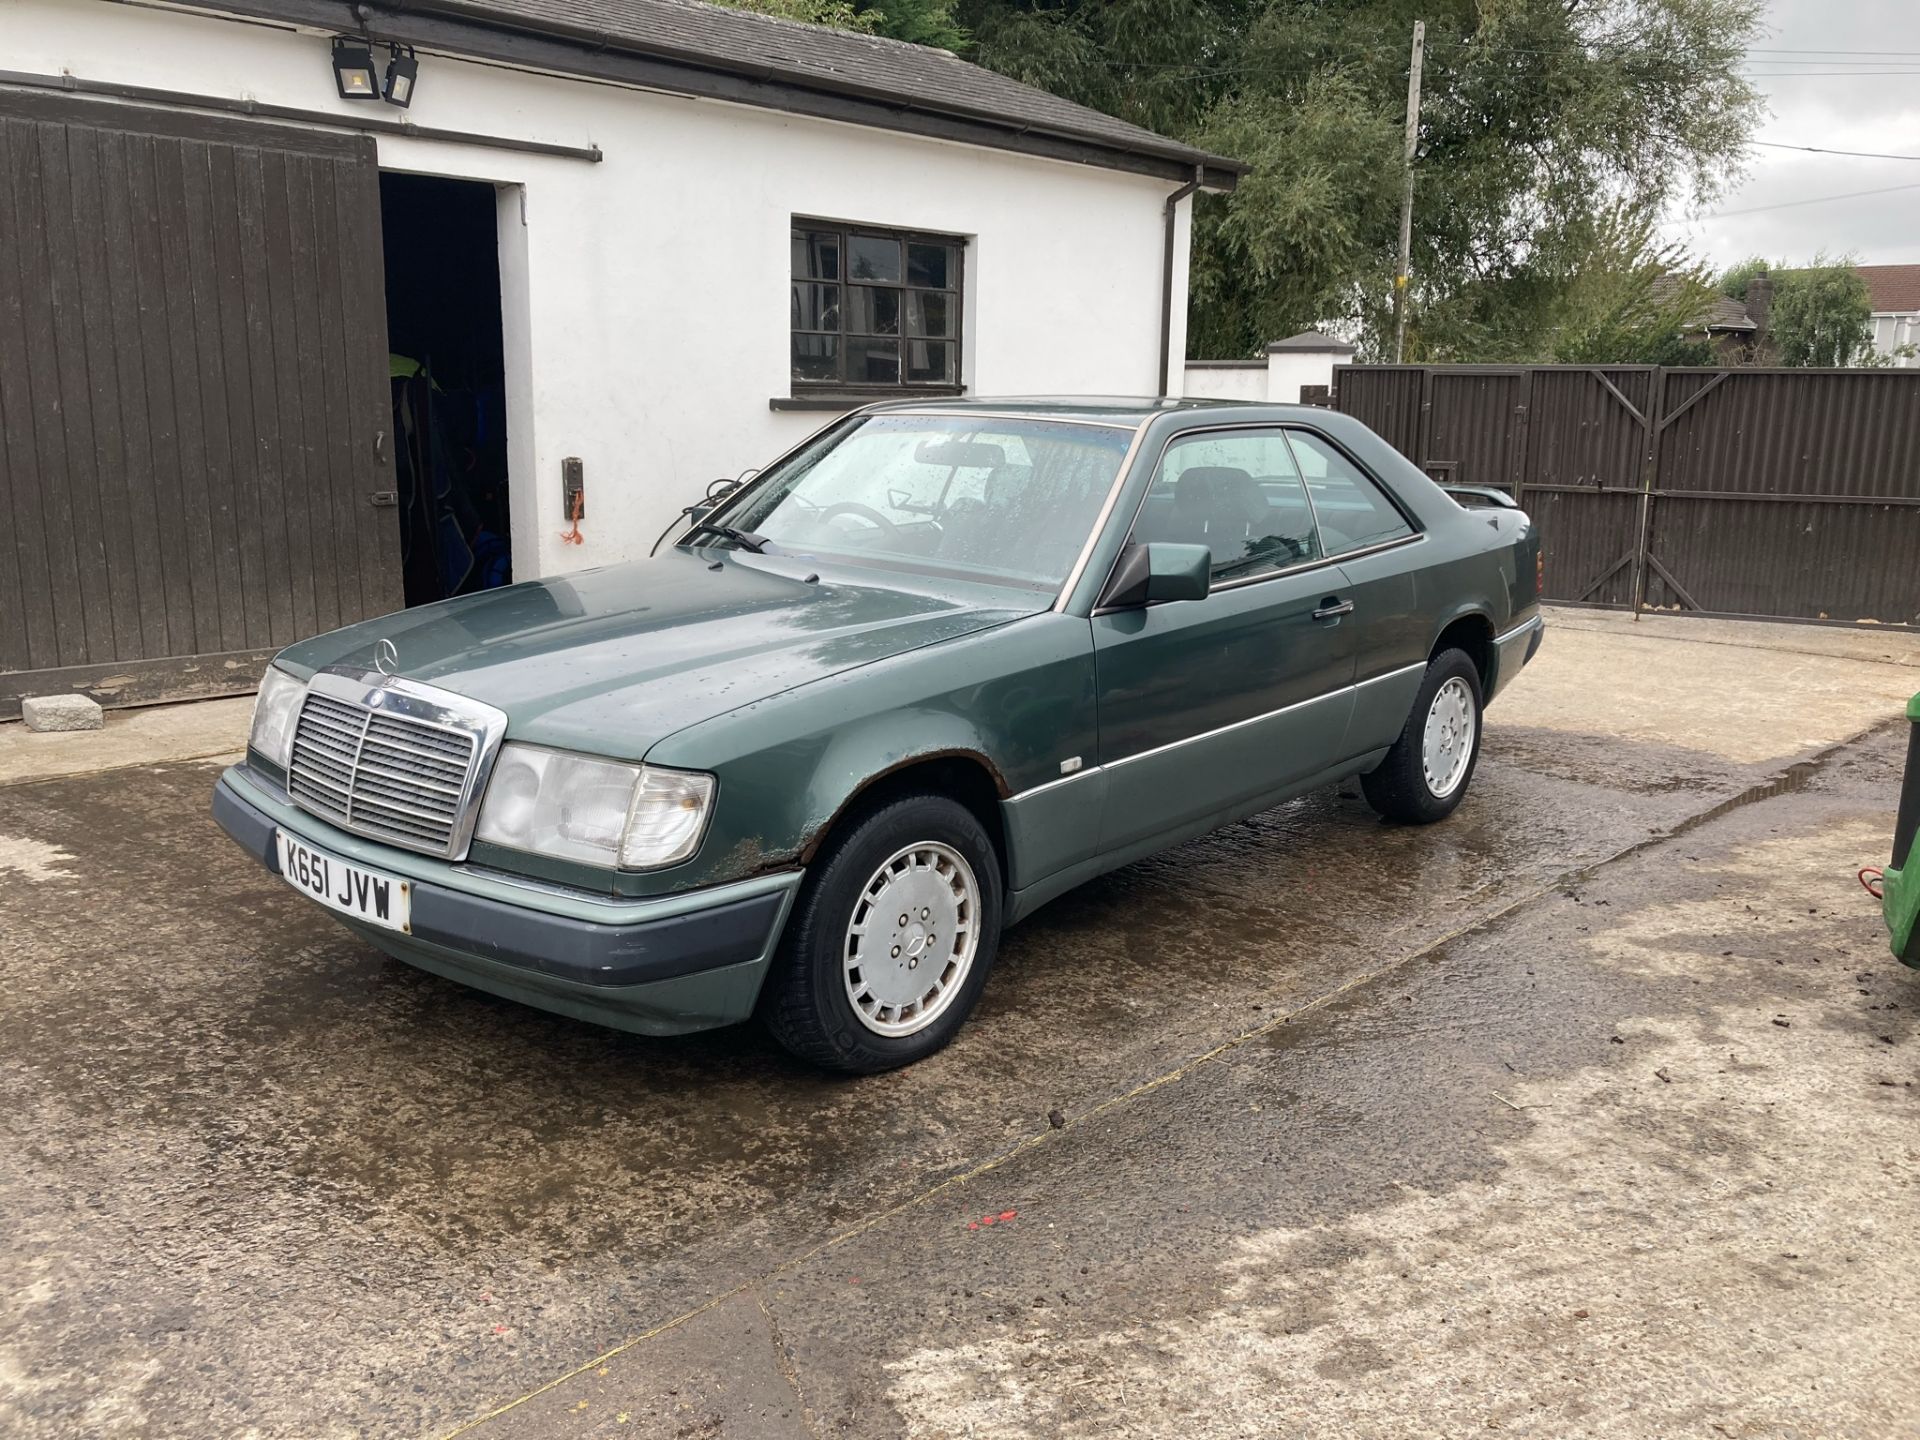 1992 MERCEDES 230E CLASSIC COUPE.LOW RESERVE LOCATION NORTHERN IRELAND. - Image 6 of 7